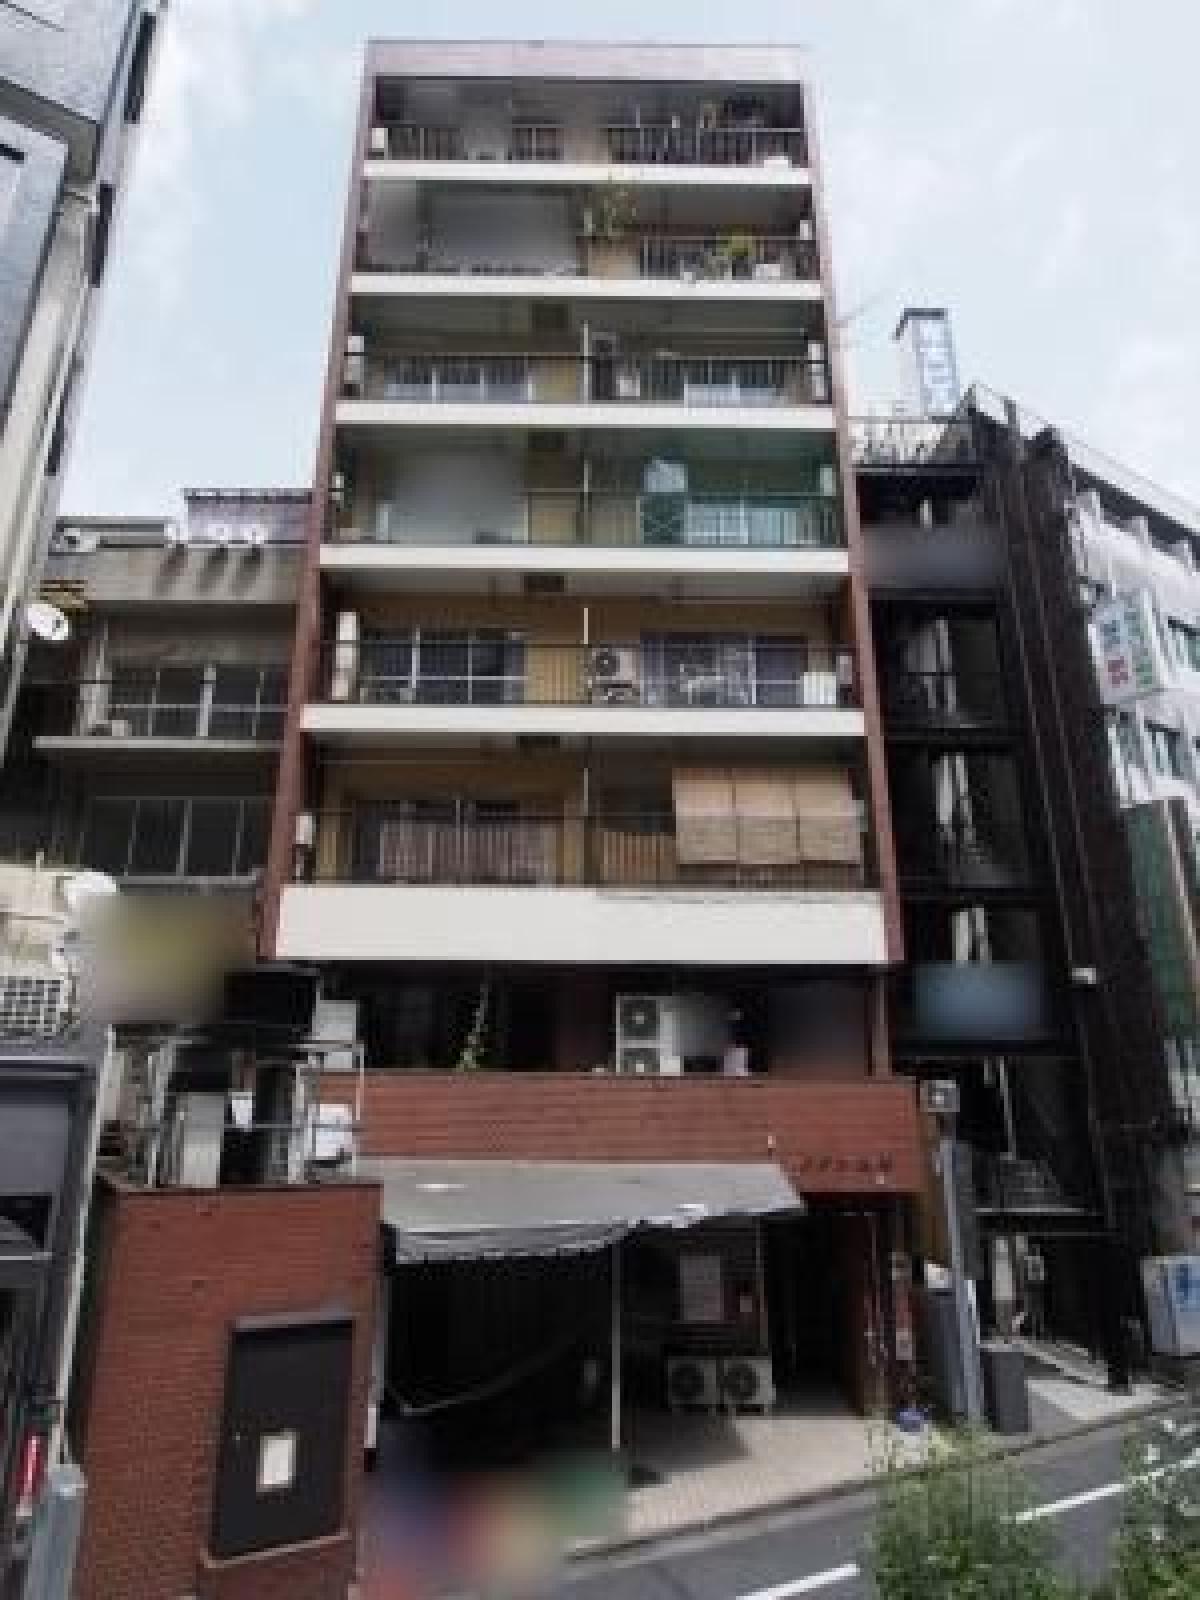 Picture of Apartment For Sale in Toshima Ku, Tokyo, Japan